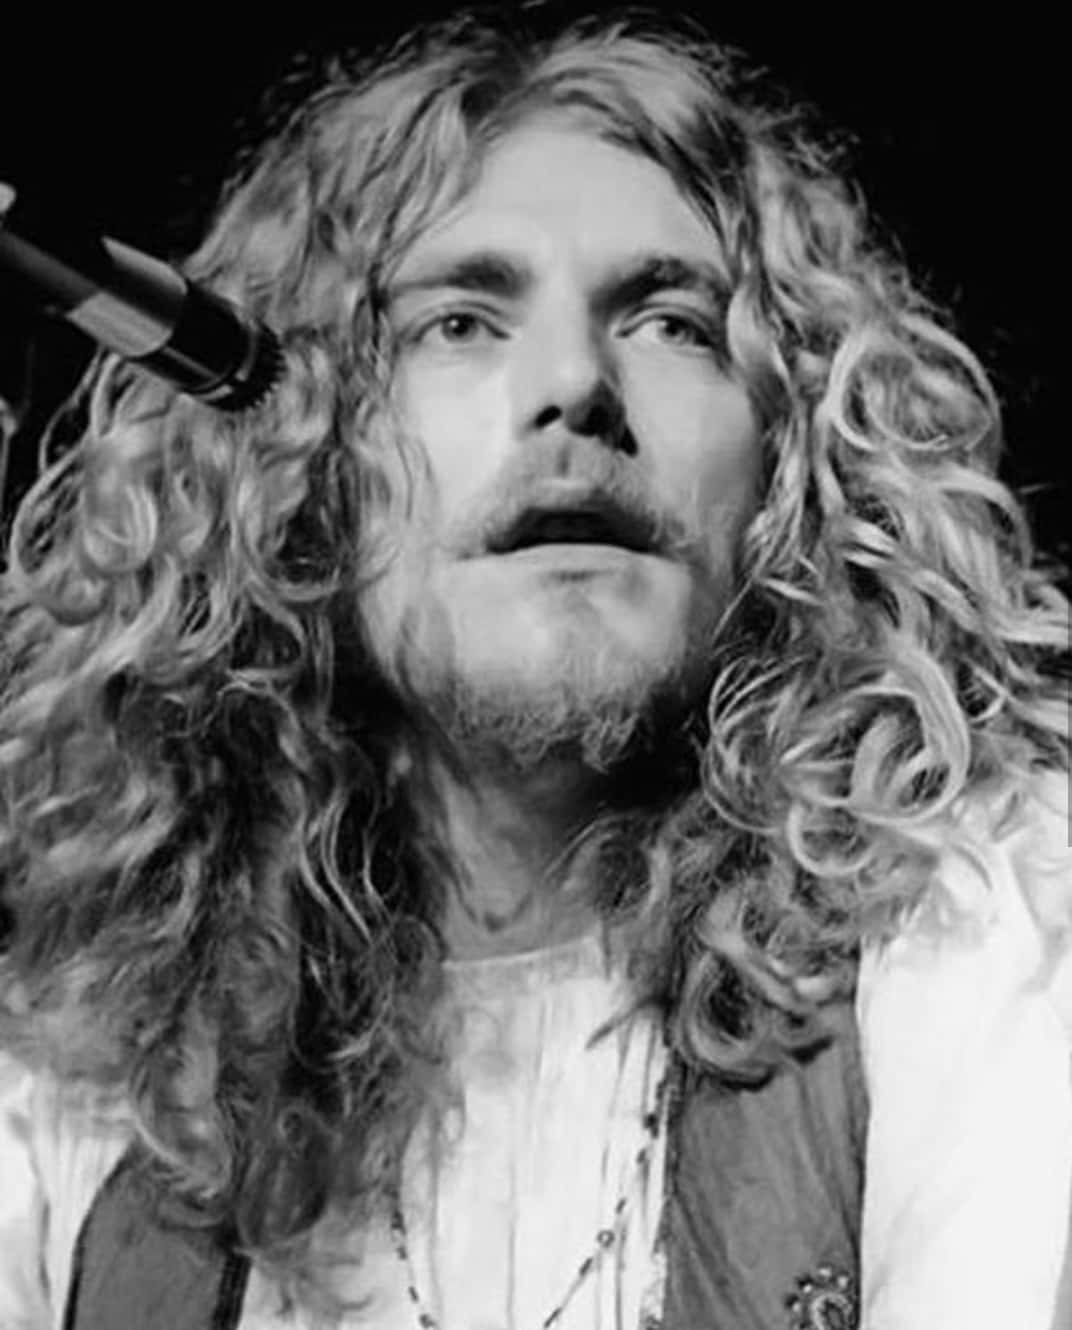 A Man With Long Curly Hair Singing Into A Microphone